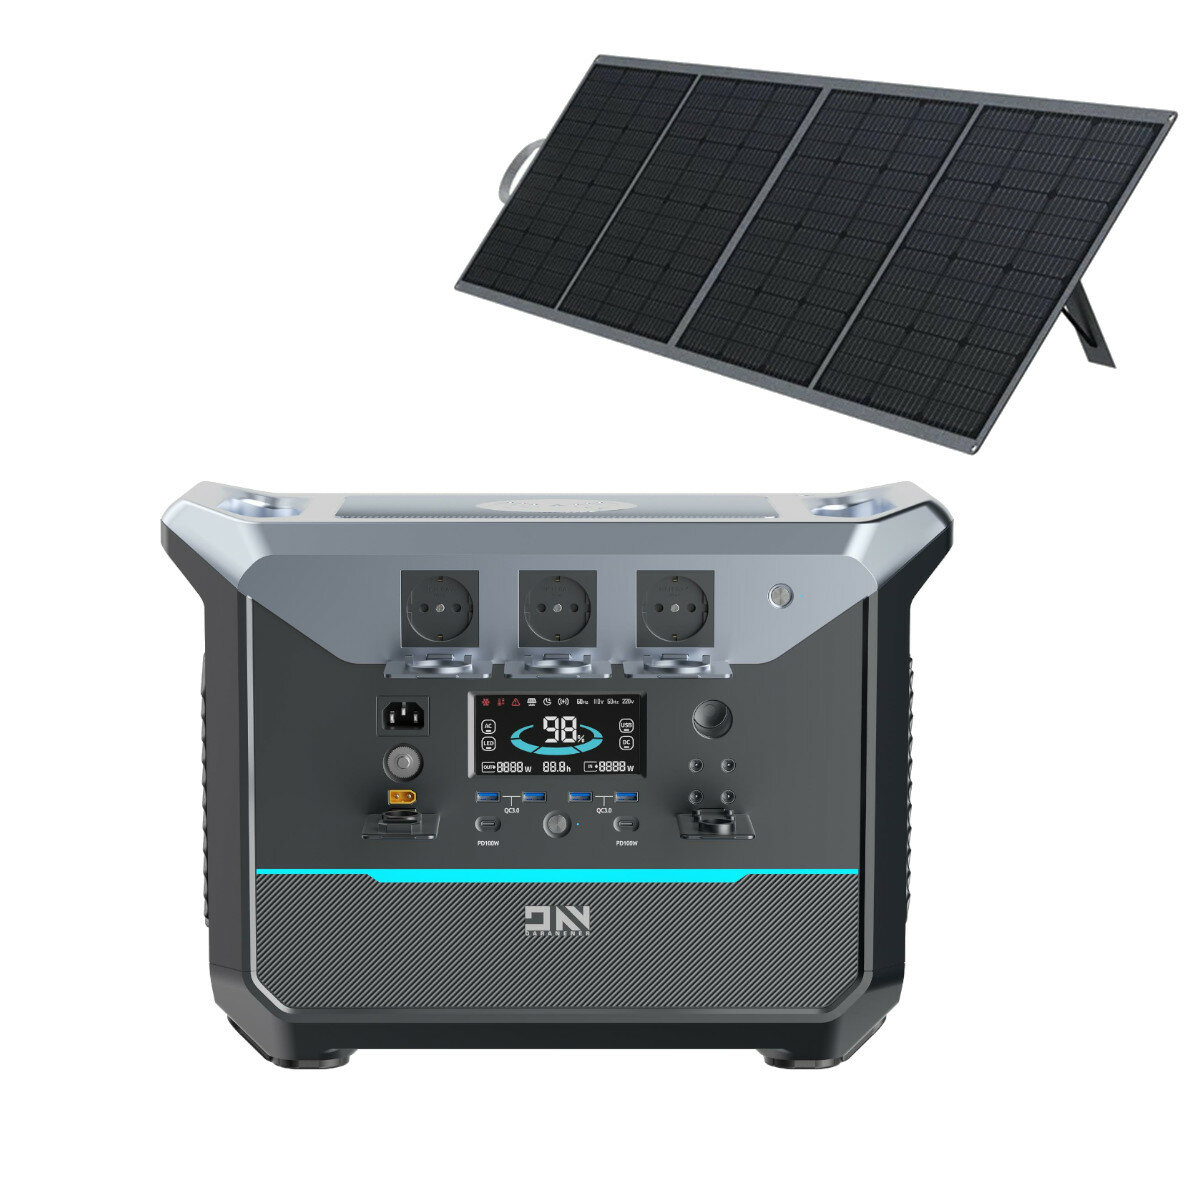 [EU Direct] DaranEner NEO2000 2000W 2073.6Wh LiFePO4 Battery Portable Power Station with 1Pc SP200 200W ETFE Solar Panel, UPS Power Supply AC Sockets with 1.8 Hours Fast Charging Solar Powered Generator for Home Outdoors Camping Travel RV